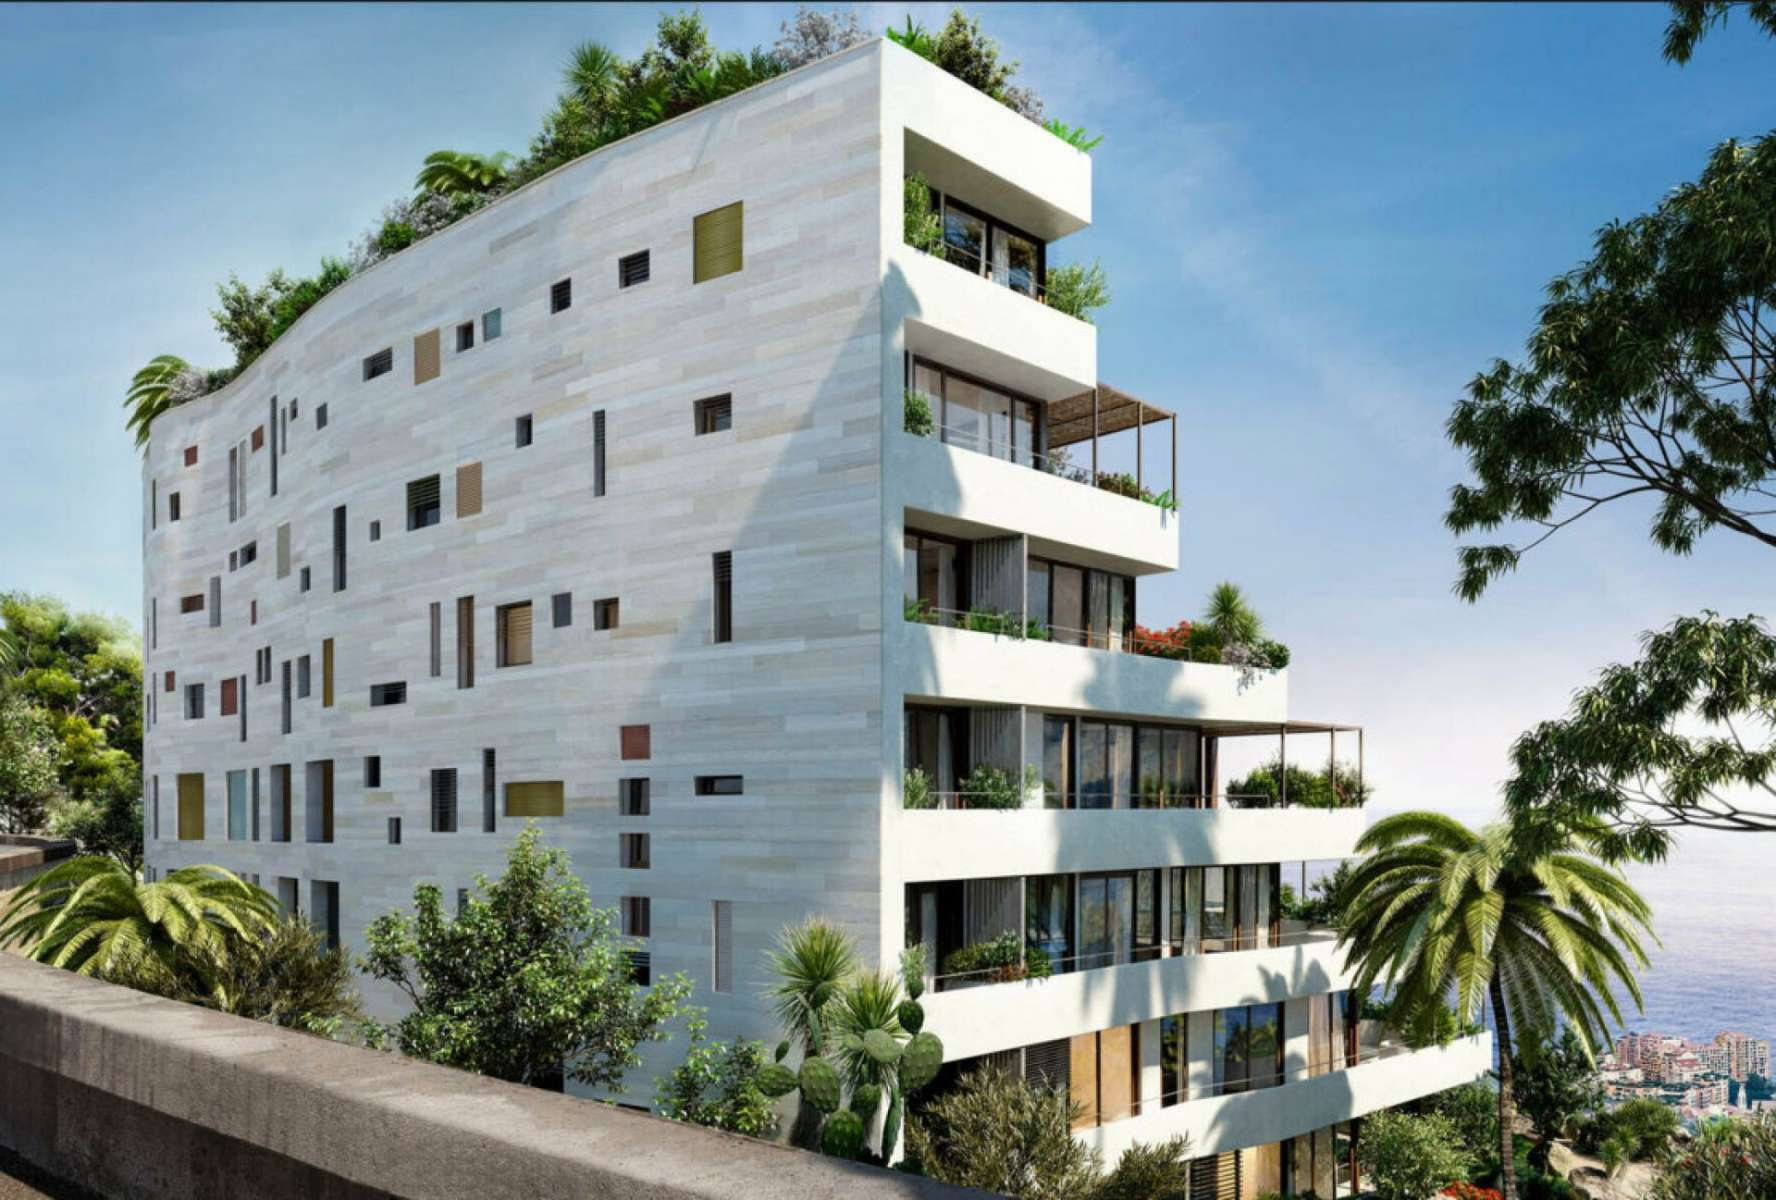 Two-bedroom apartment in the new development L'Exotique